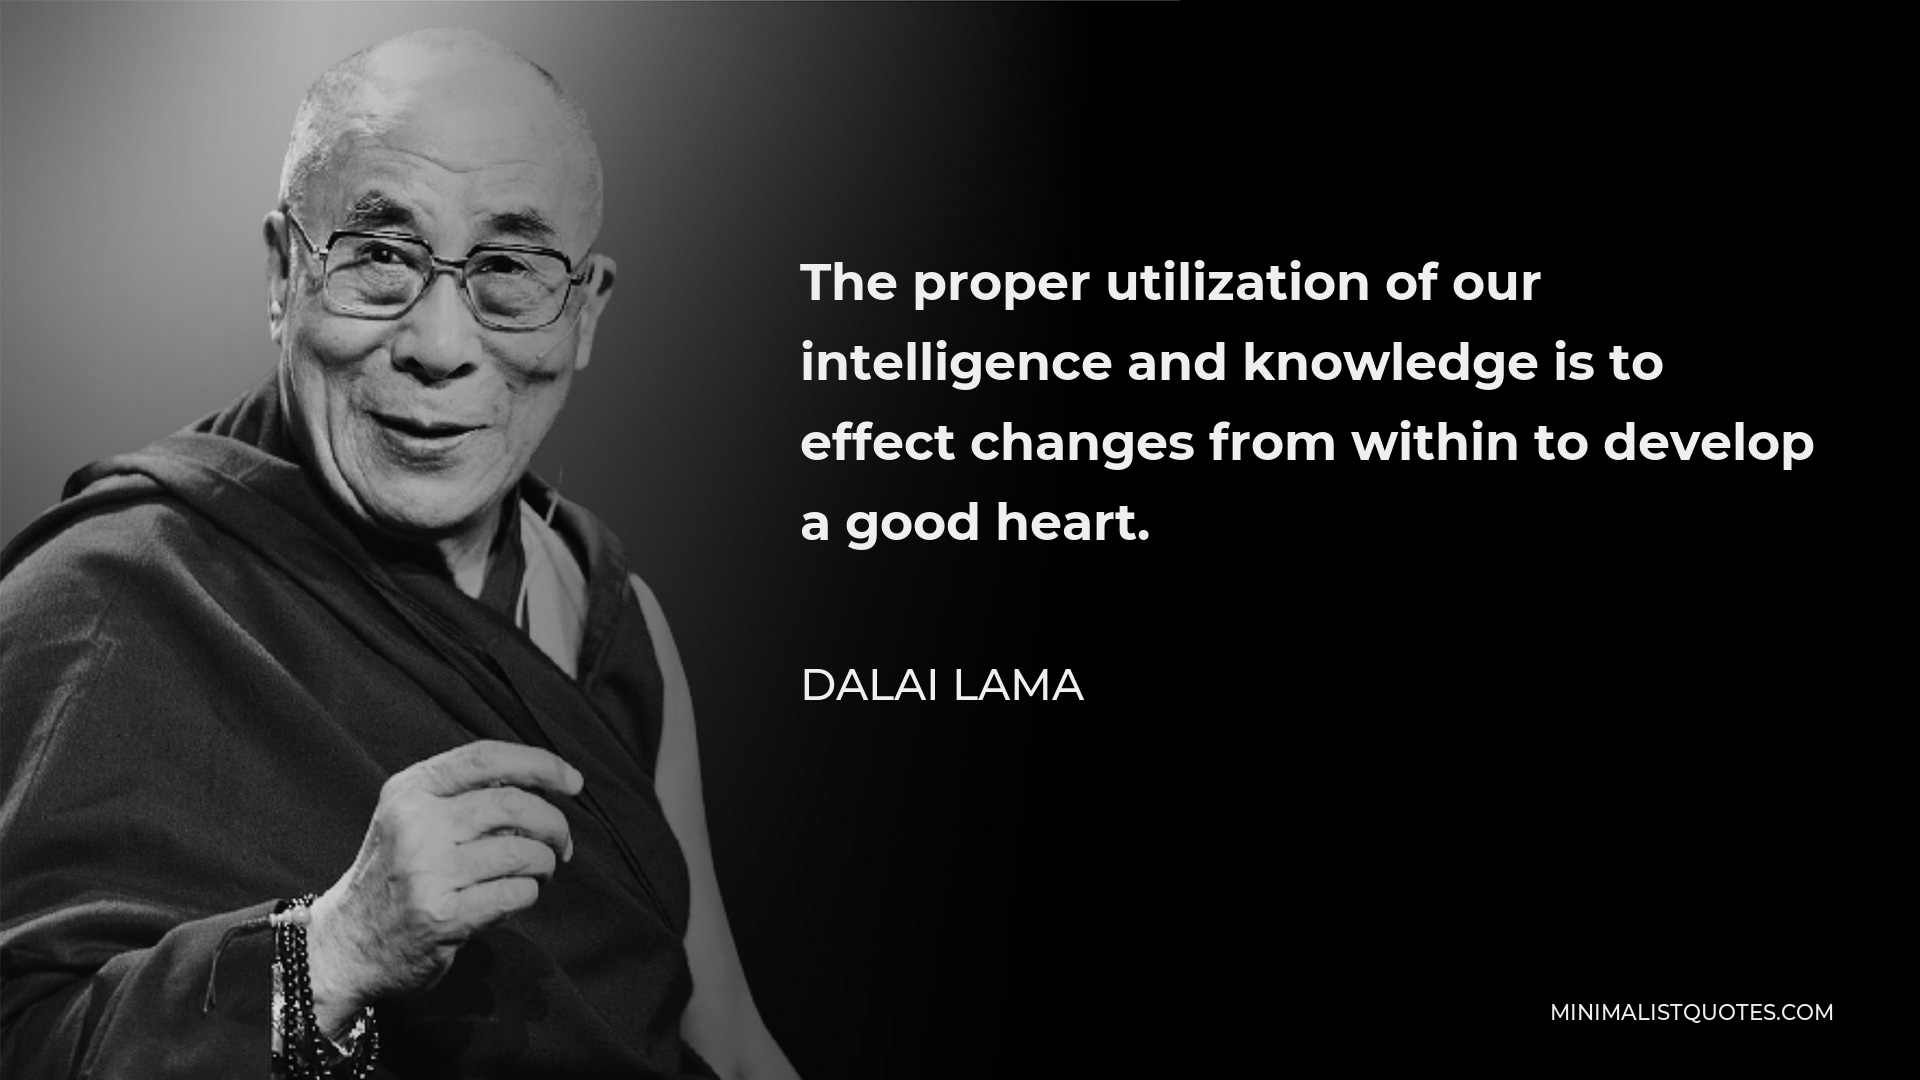 Dalai Lama Quote - The proper utilization of our intelligence and knowledge is to effect changes from within to develop a good heart.